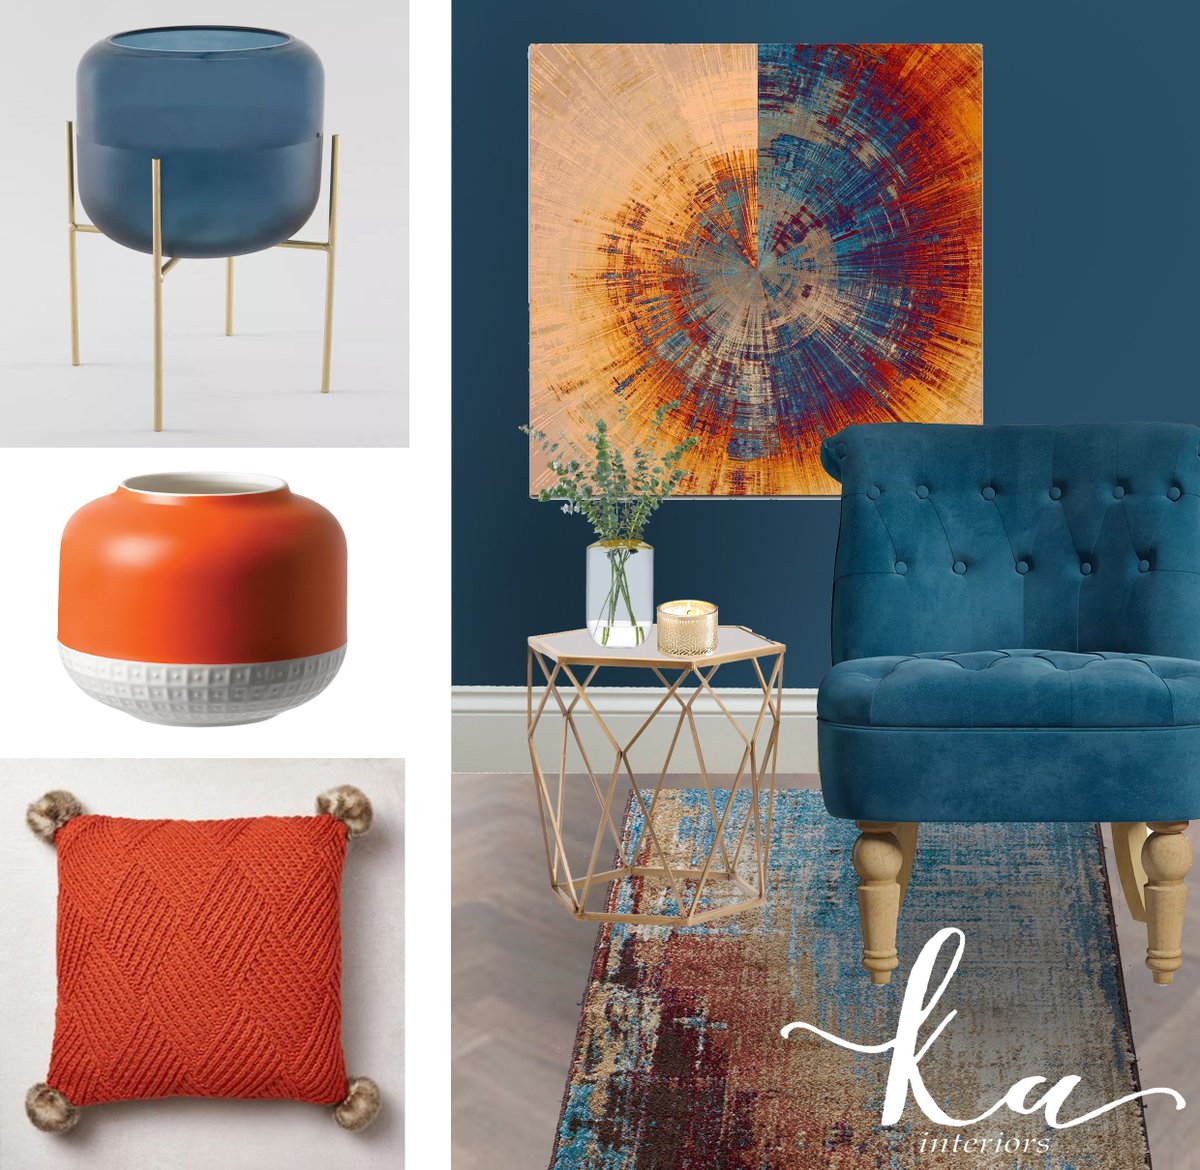 It’s time to get cosy with these beautiful deep blues and burnt oranges. 
#interiordesign #onlineinteriordesign #cosy #warmthforwinter #orange #blue #gold #depthoftones #chair #cushions #artwork #schemes #visuals #inspiration